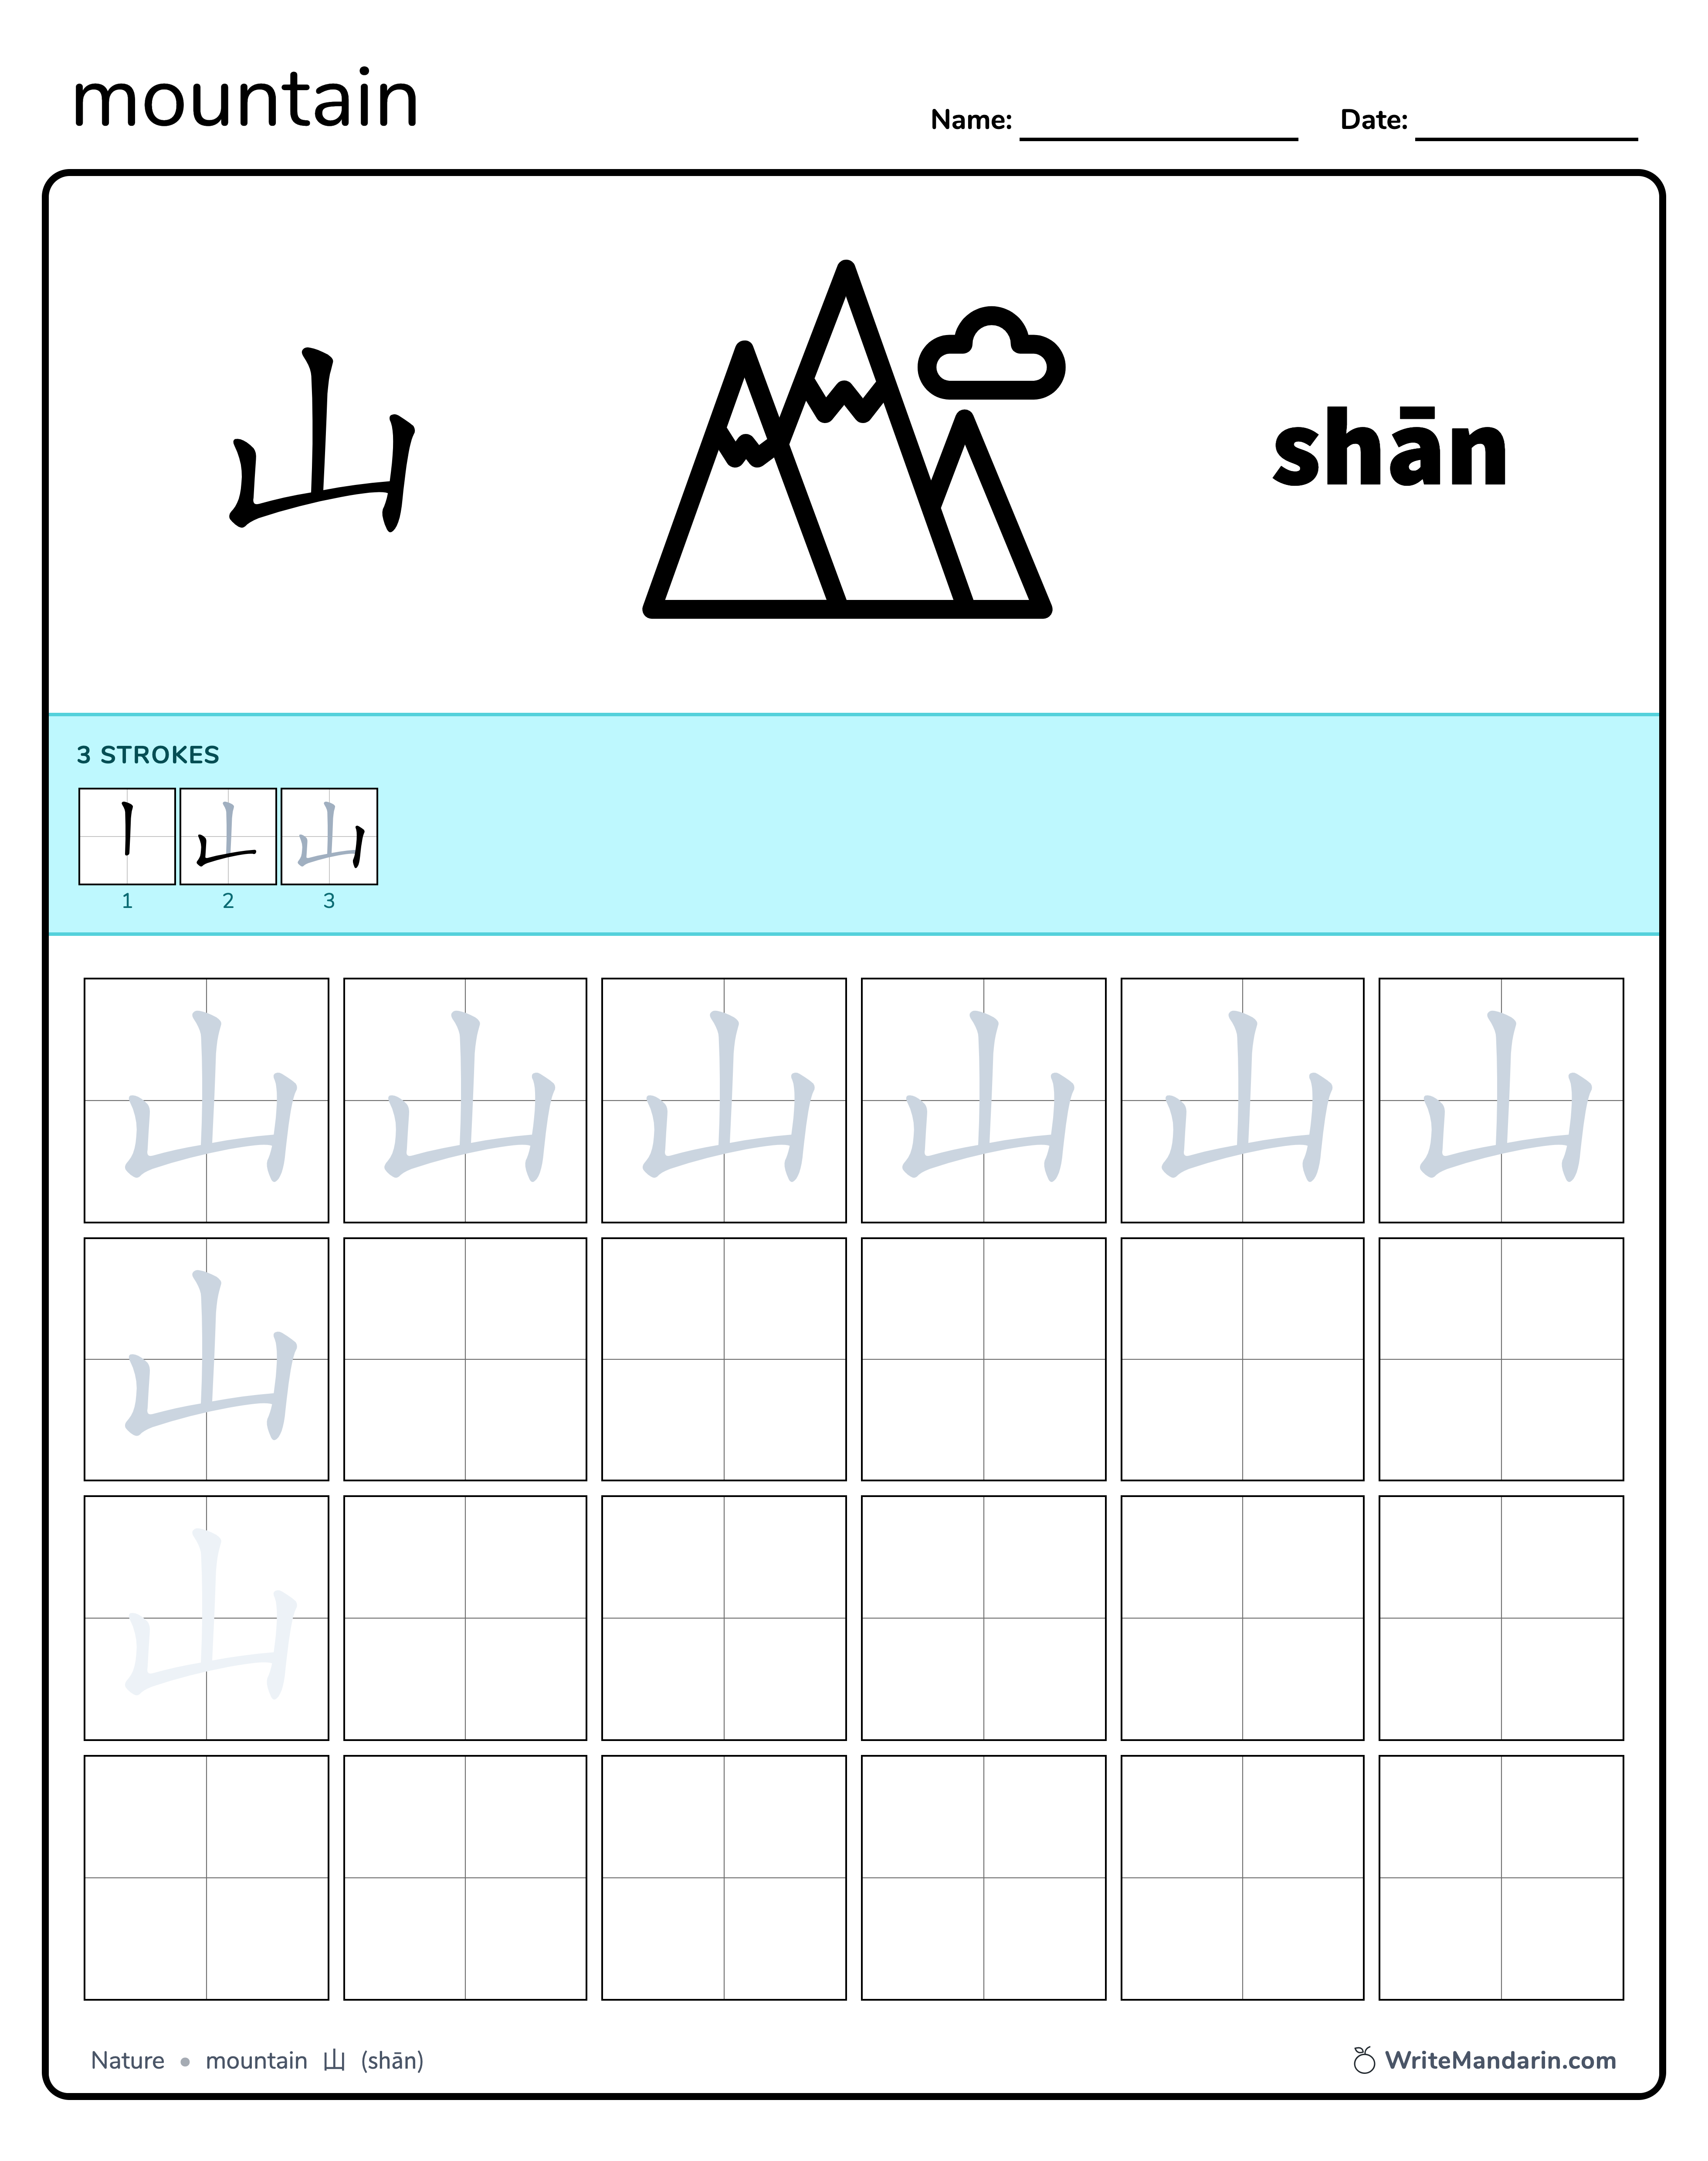 Preview image of related writing worksheet